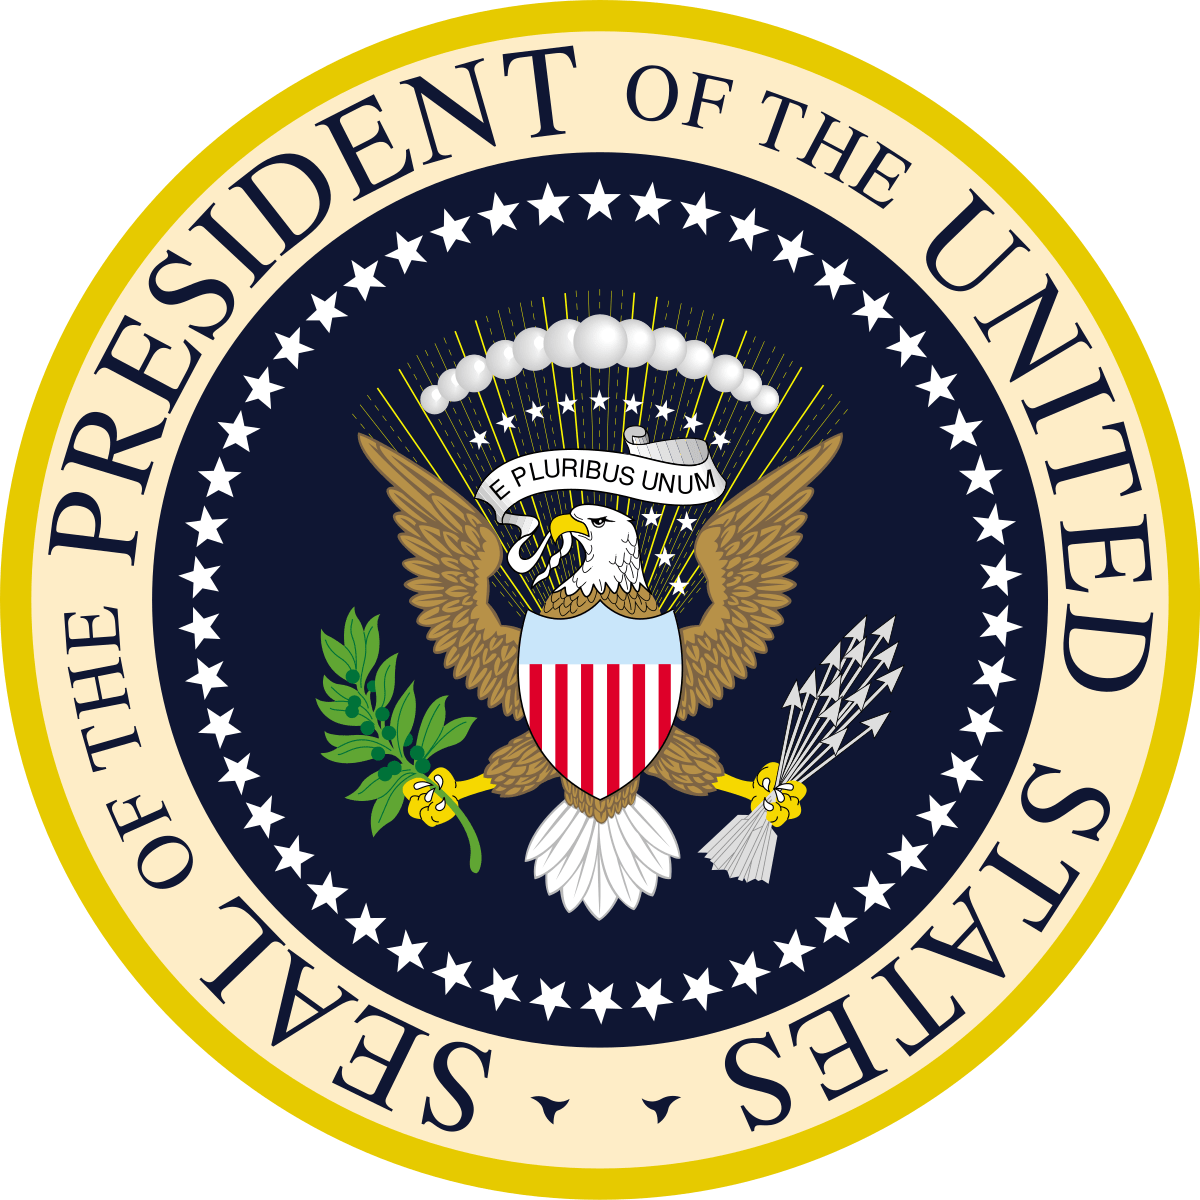 The seal of the president of the United States